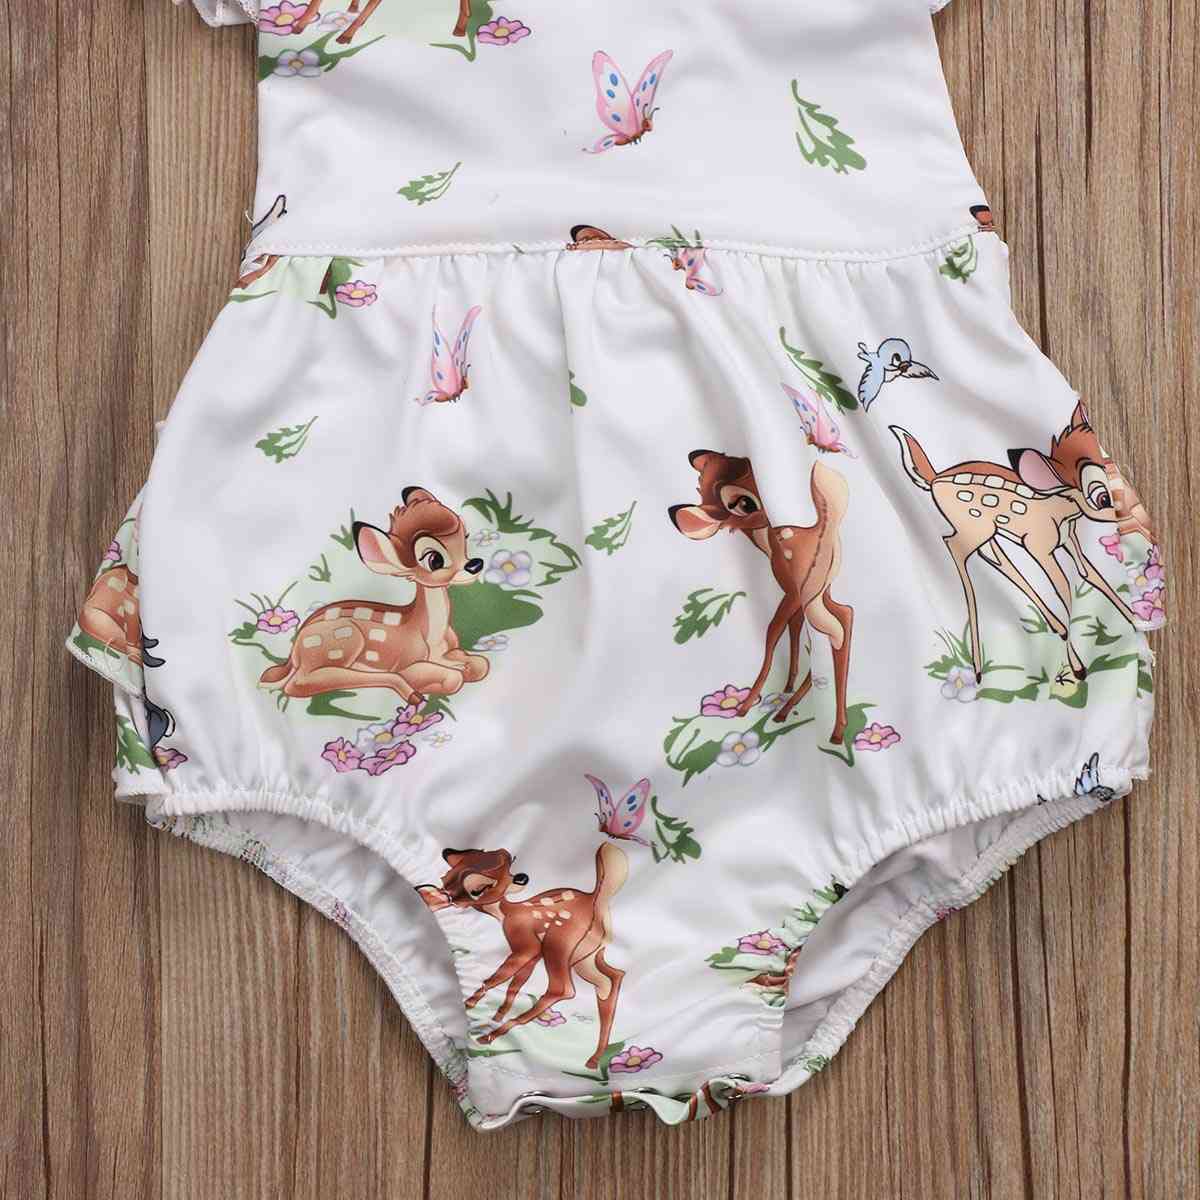 Fashion Newborn Toddler Infant Baby Deer Ruffles Romper Jumpsuit Clothes Outfits